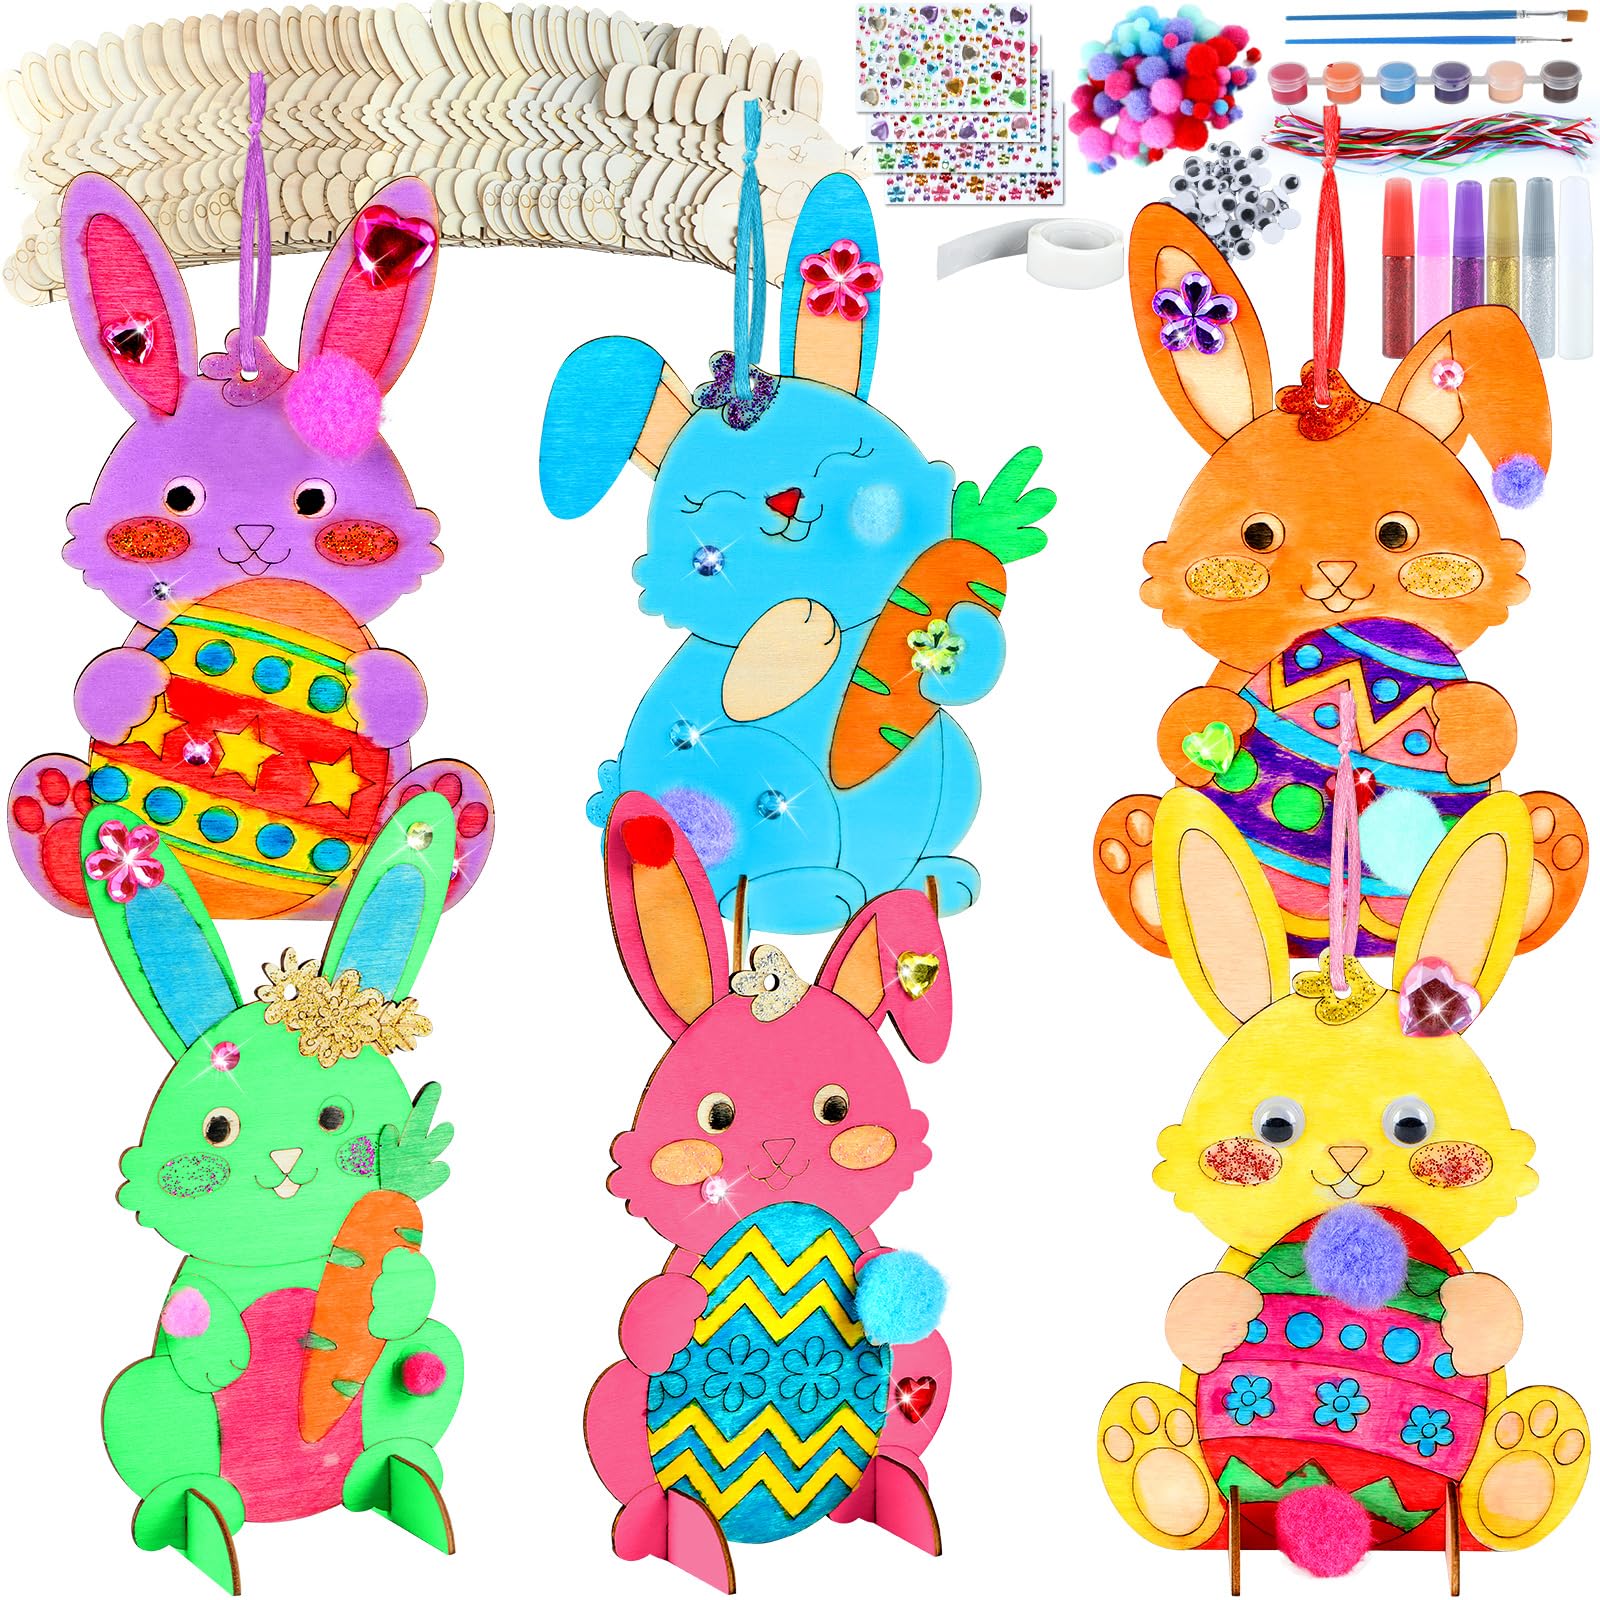 QOUBAI 36 Pack Easter Unfinished Wood Crafts for Kids DIY Coloring Easter Bunny Cutout DIY Easter Hanging Rabbit Wood Arts Crafts Ornaments for Party Favors Activities Gifts Spring Home Decorations